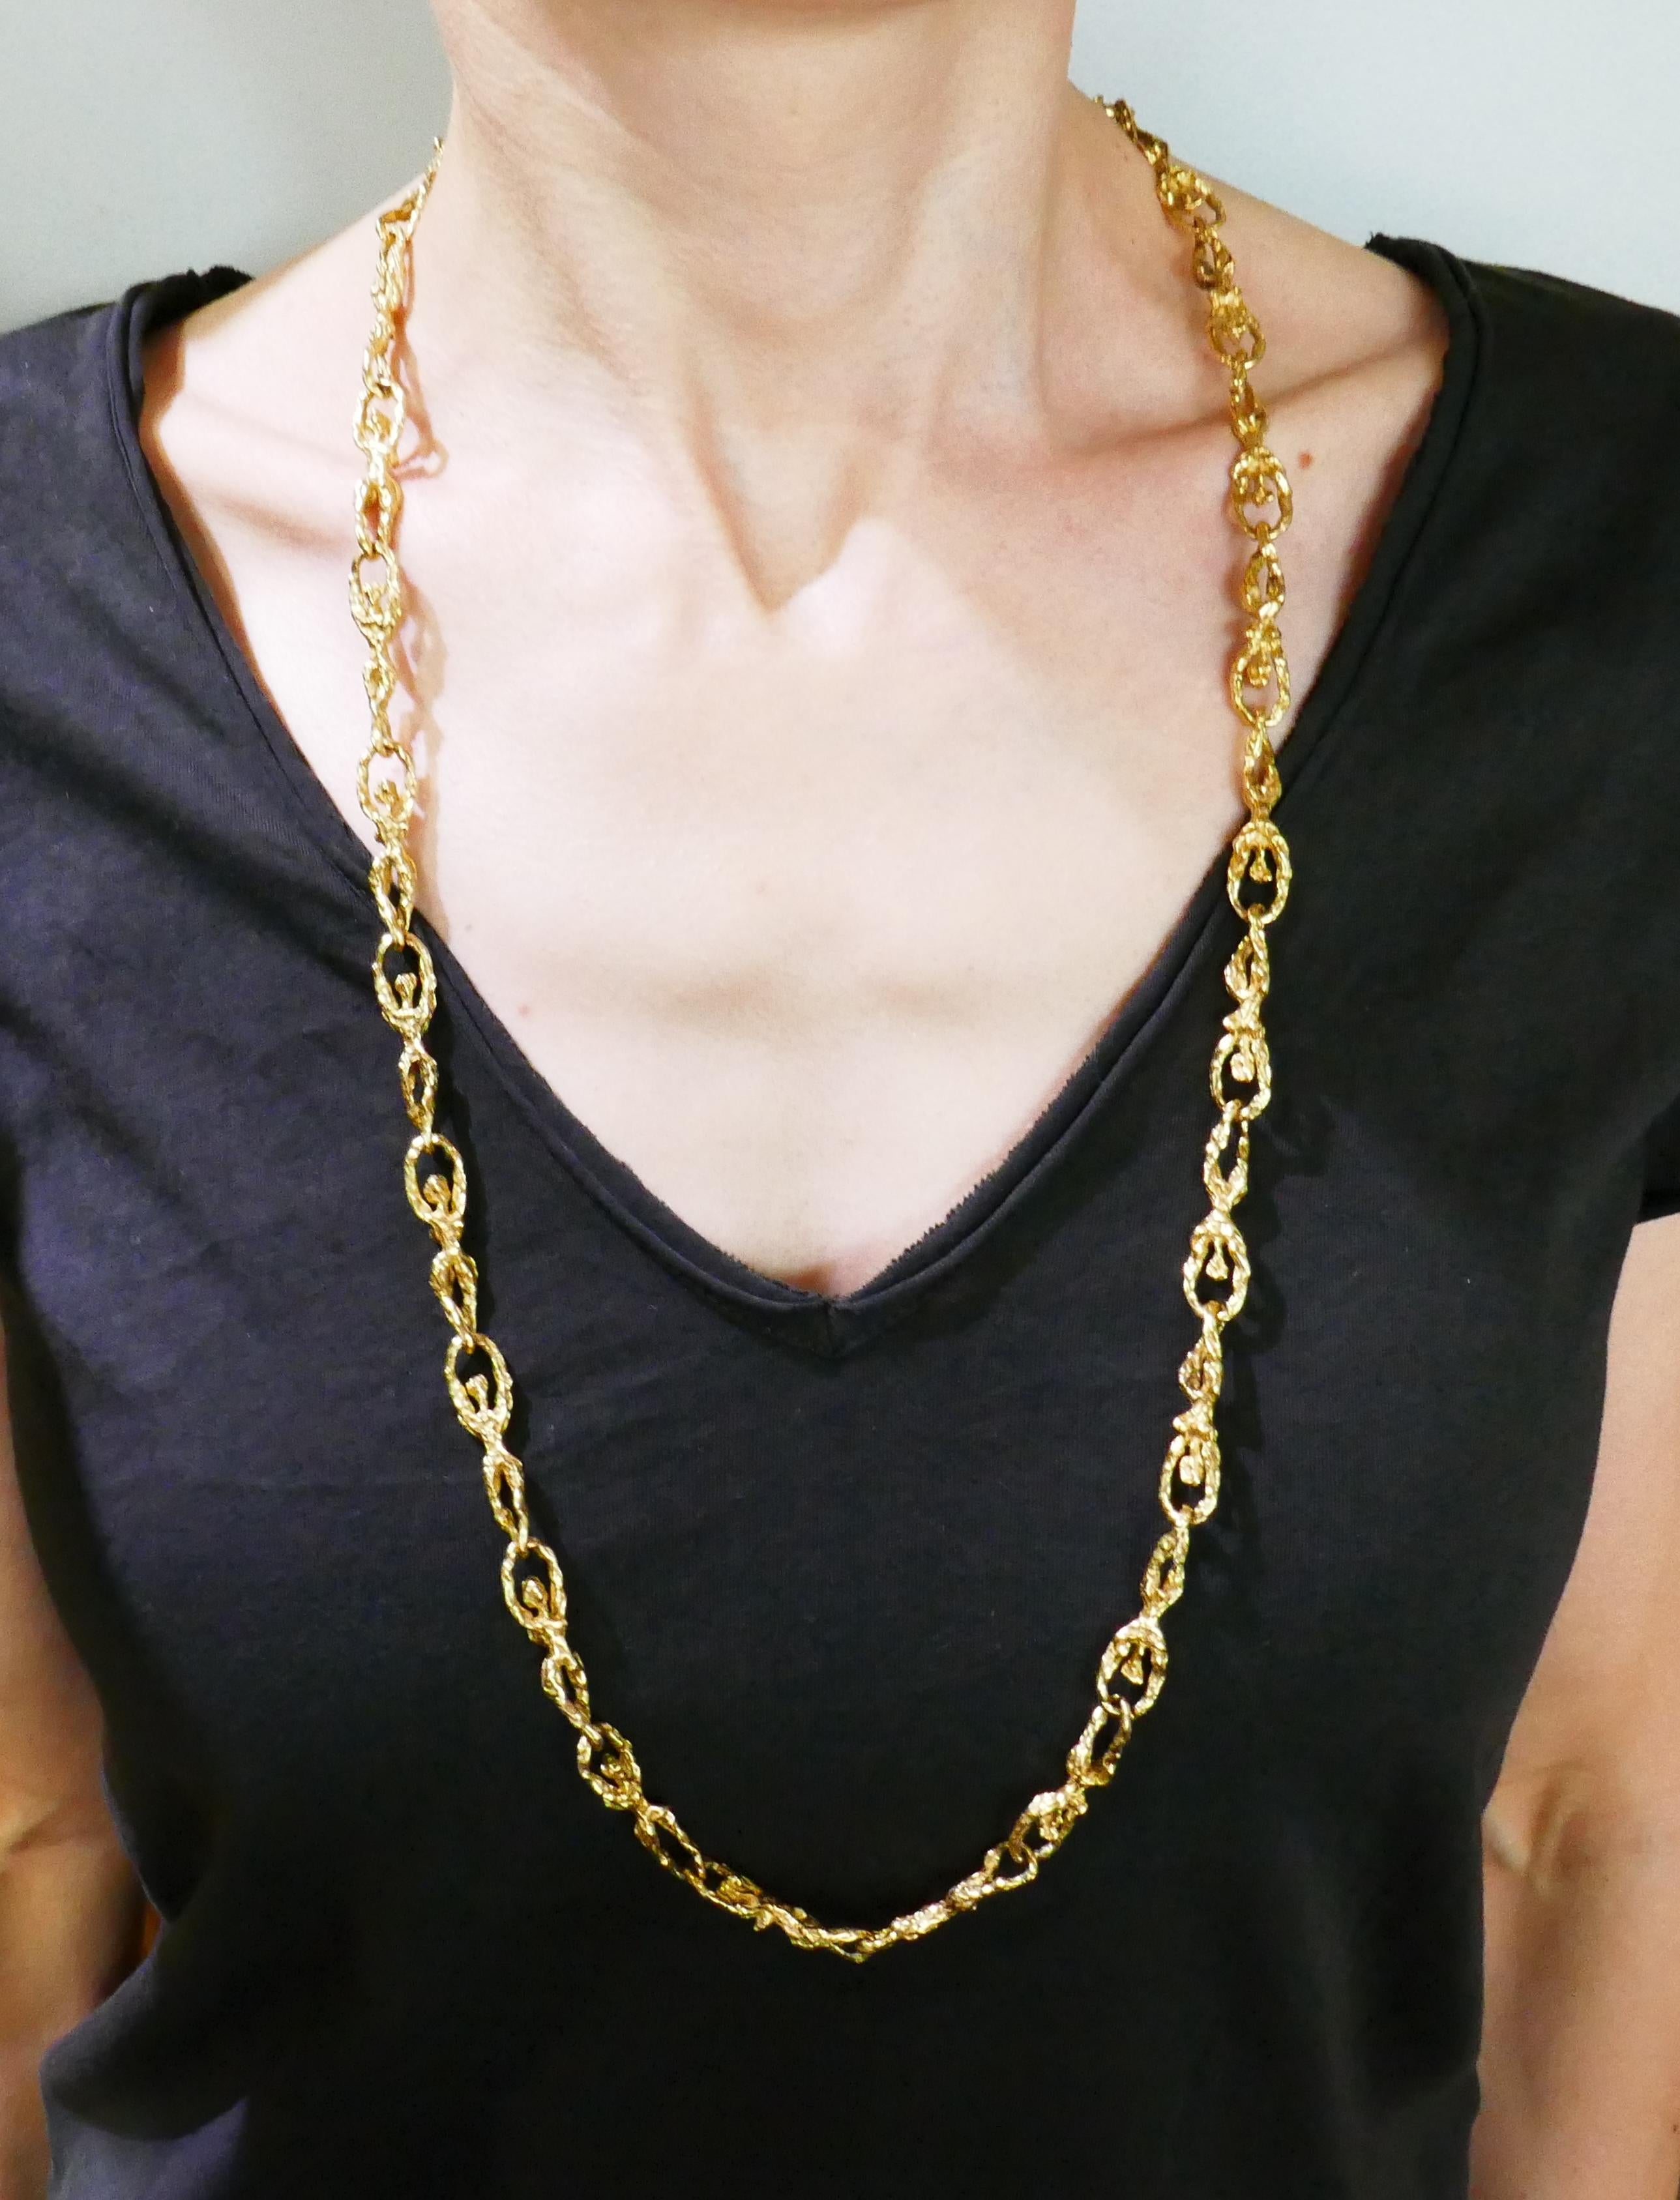 Elegant and stylish textured link chain necklace created in France in the 1980s. Links are designed as a man's and woman's bodies. Substantial and wearable, the necklace is a great addition to your jewelry collection. You will enjoy wearing it on